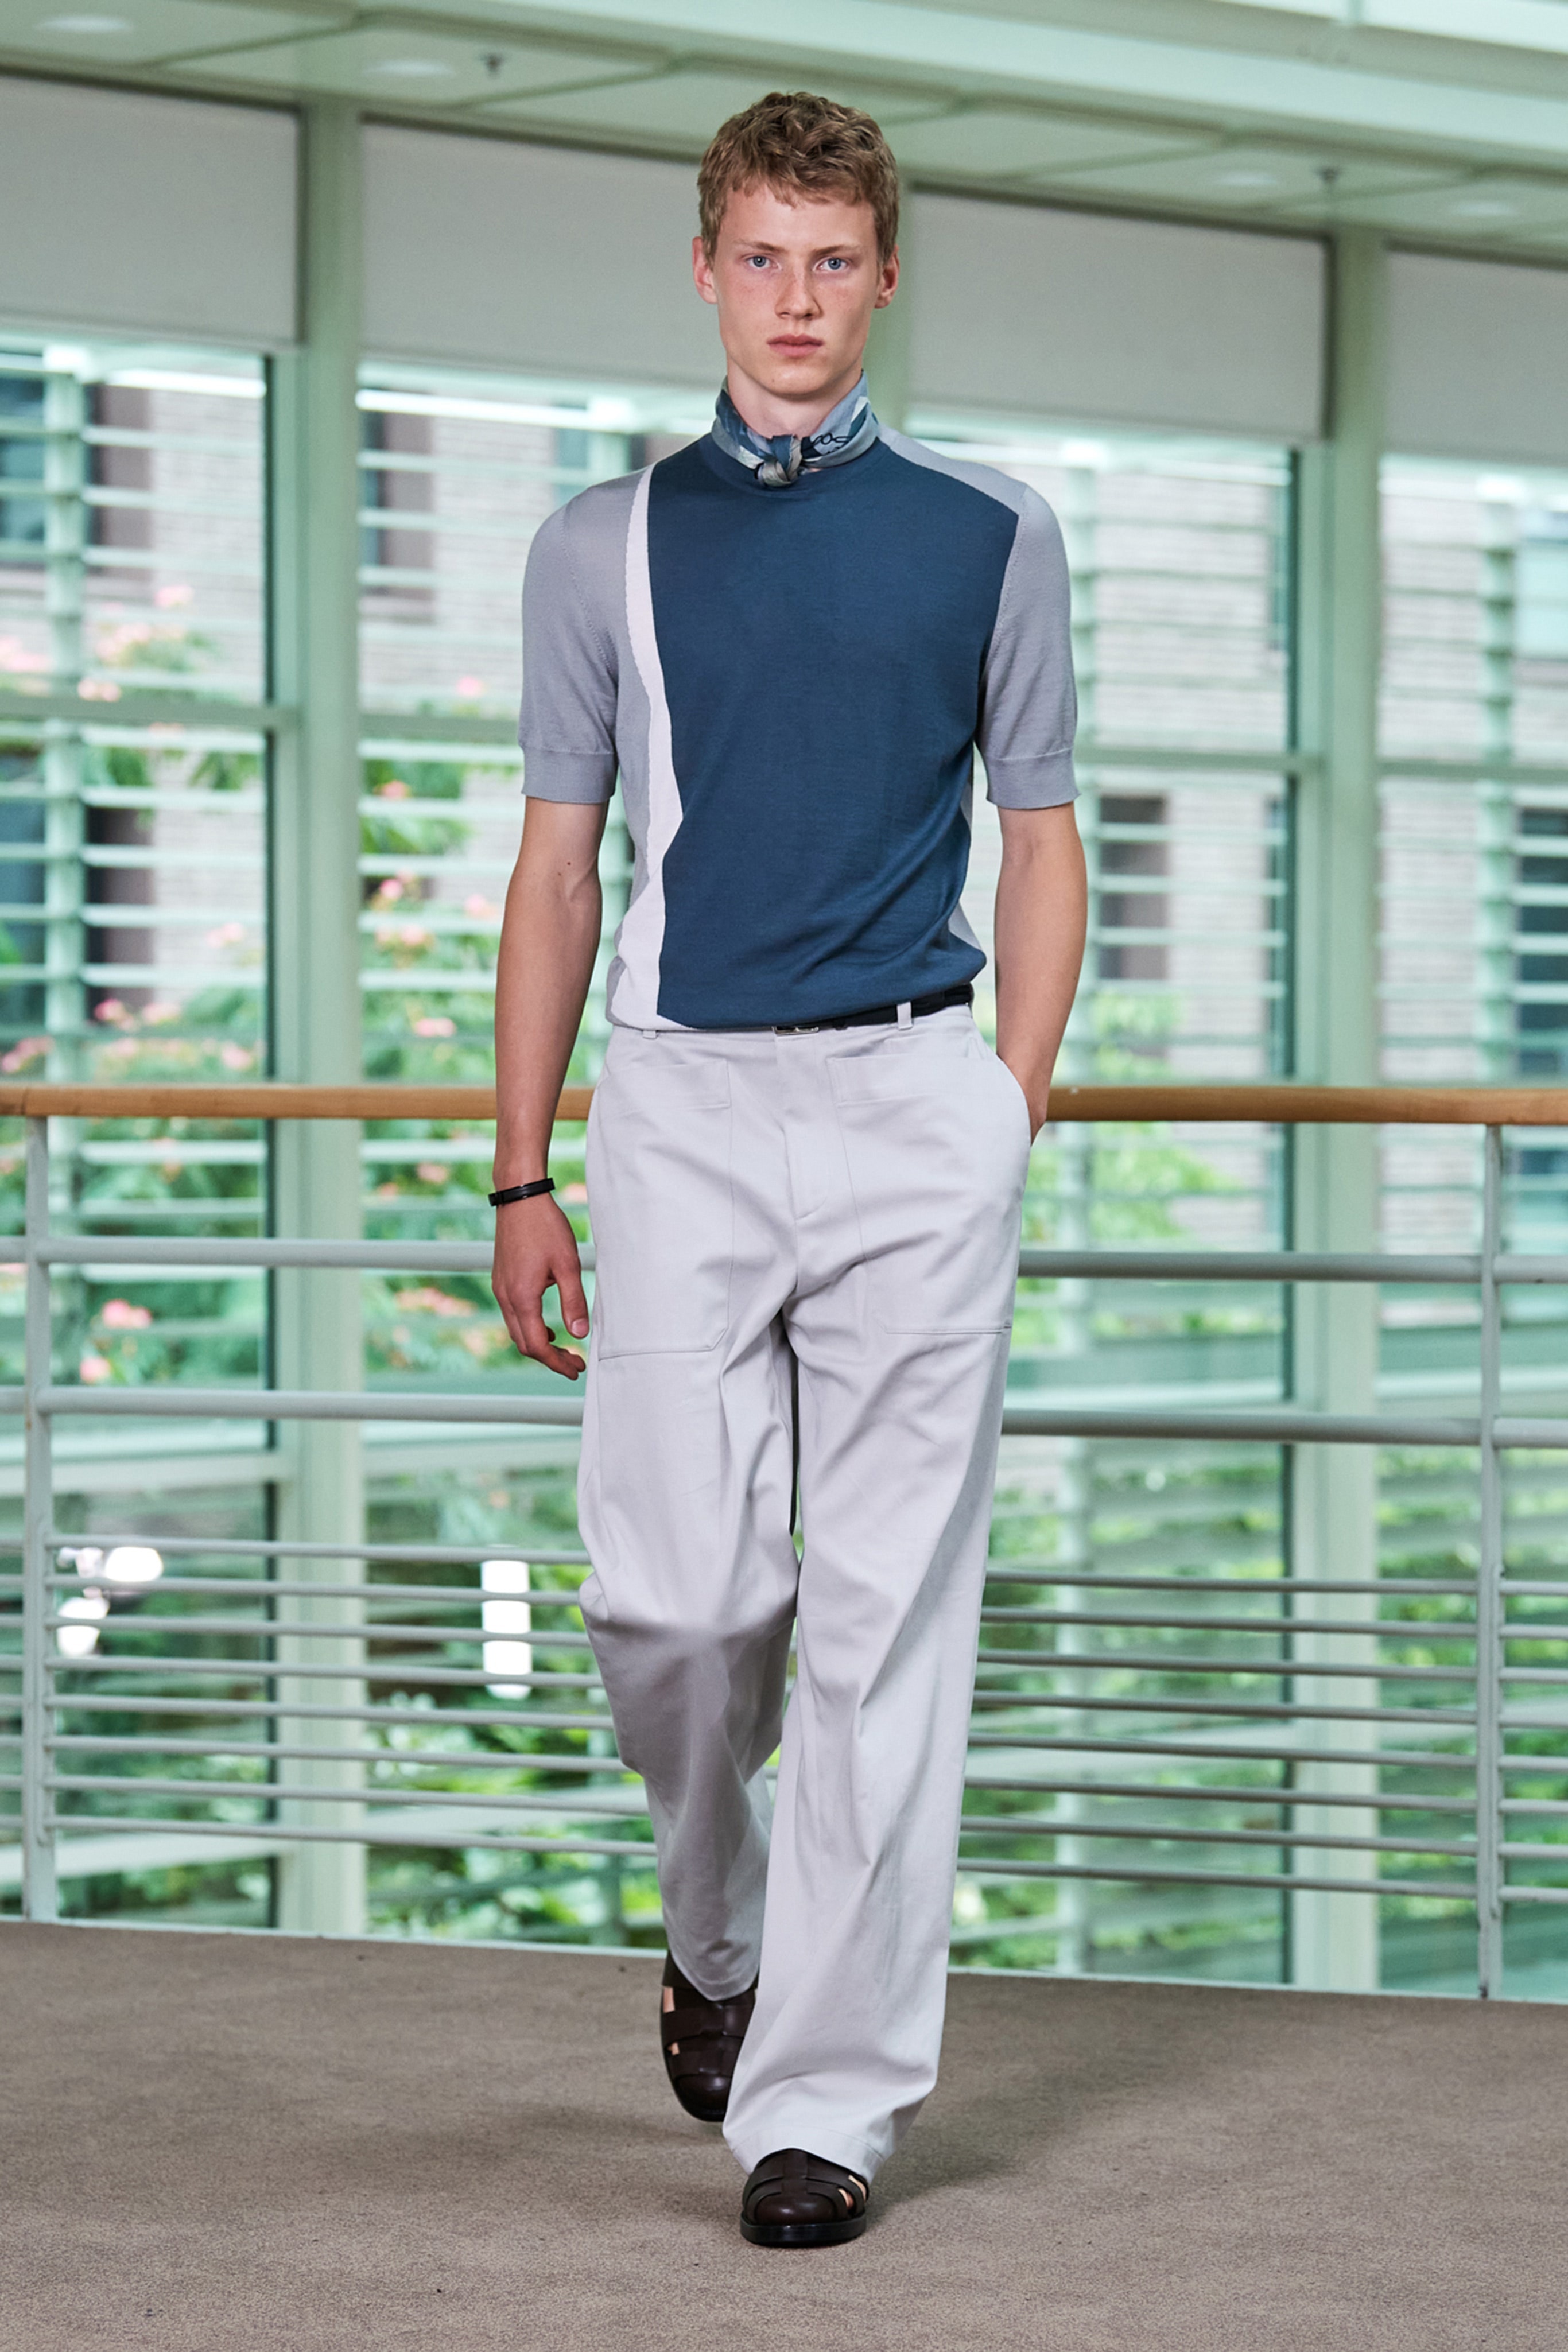 Hermès Spring 2021 Menswear Collection Runway apparel clothing ss21 summer